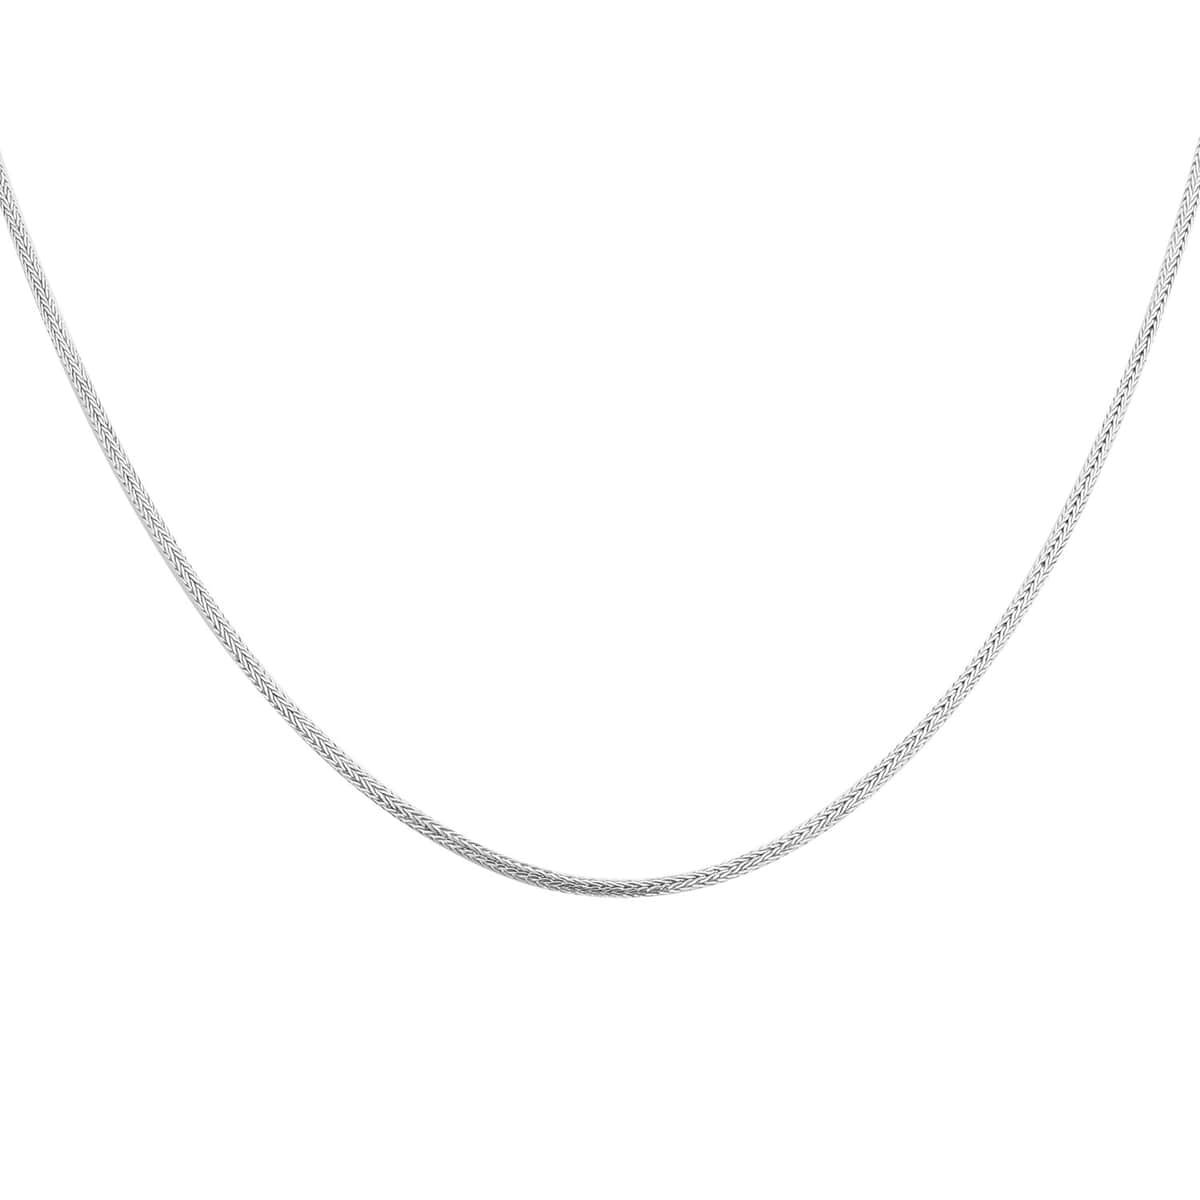 BALI LEGACY Sterling Silver Tulang Naga Chain Necklace 24 Inches 19.35 Grams image number 4